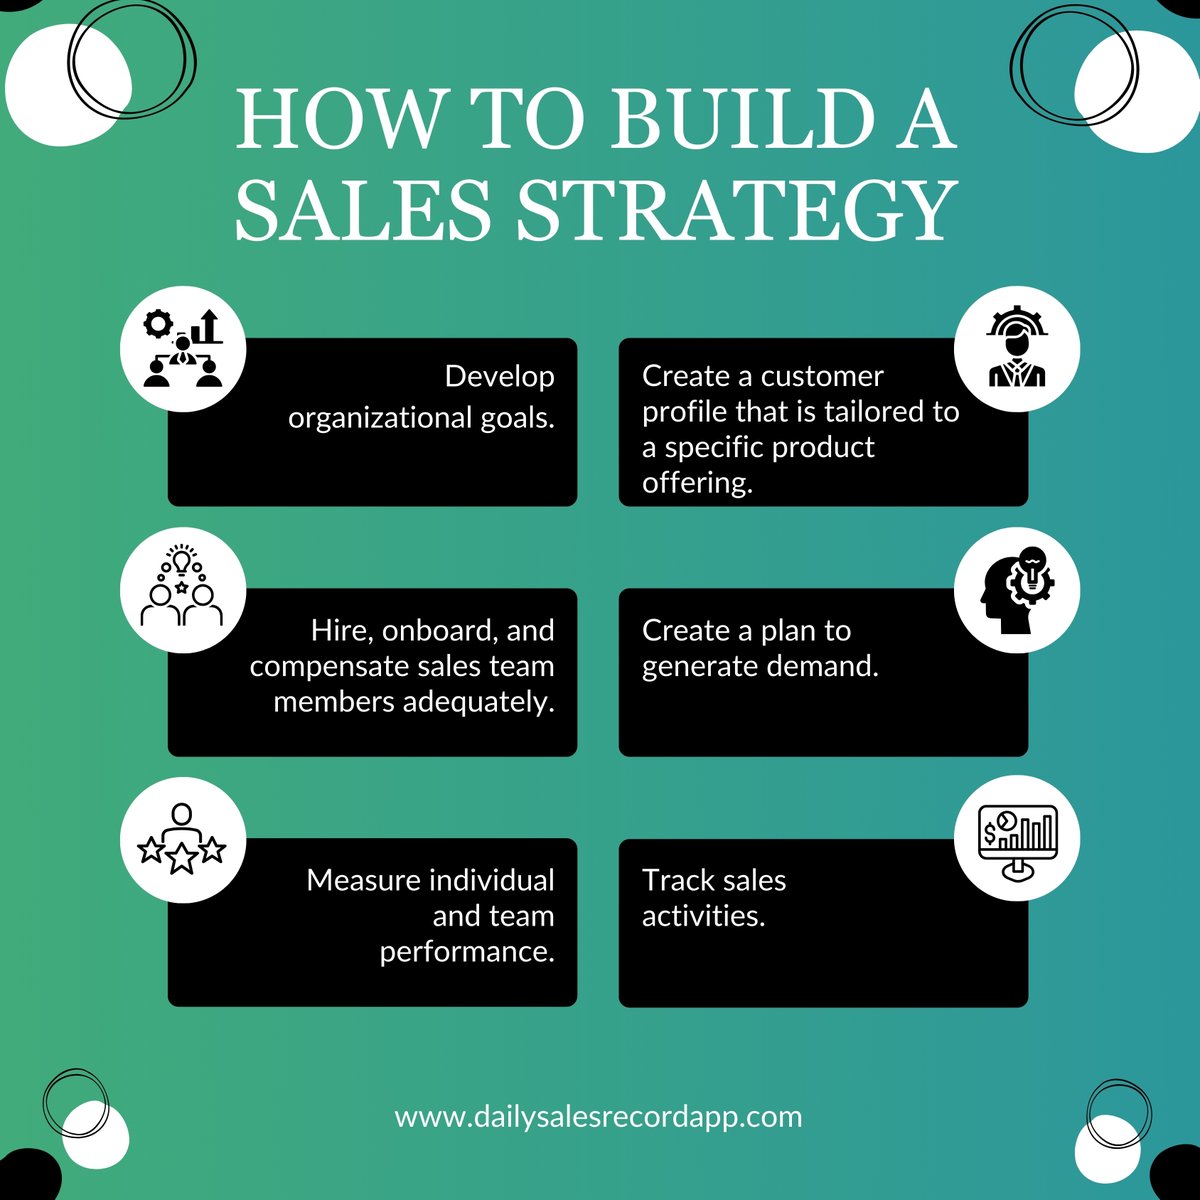 To build a comprehensive sales plan, follow these tips.

#customersatisfaction
#businesssuccess
#customerrelationships
#excellentservice
#customerexperience
#loyalty
#salesboost
#personalization
#customerneeds
#appreciation
#customercentric
#longtermsuccess
#clientretention